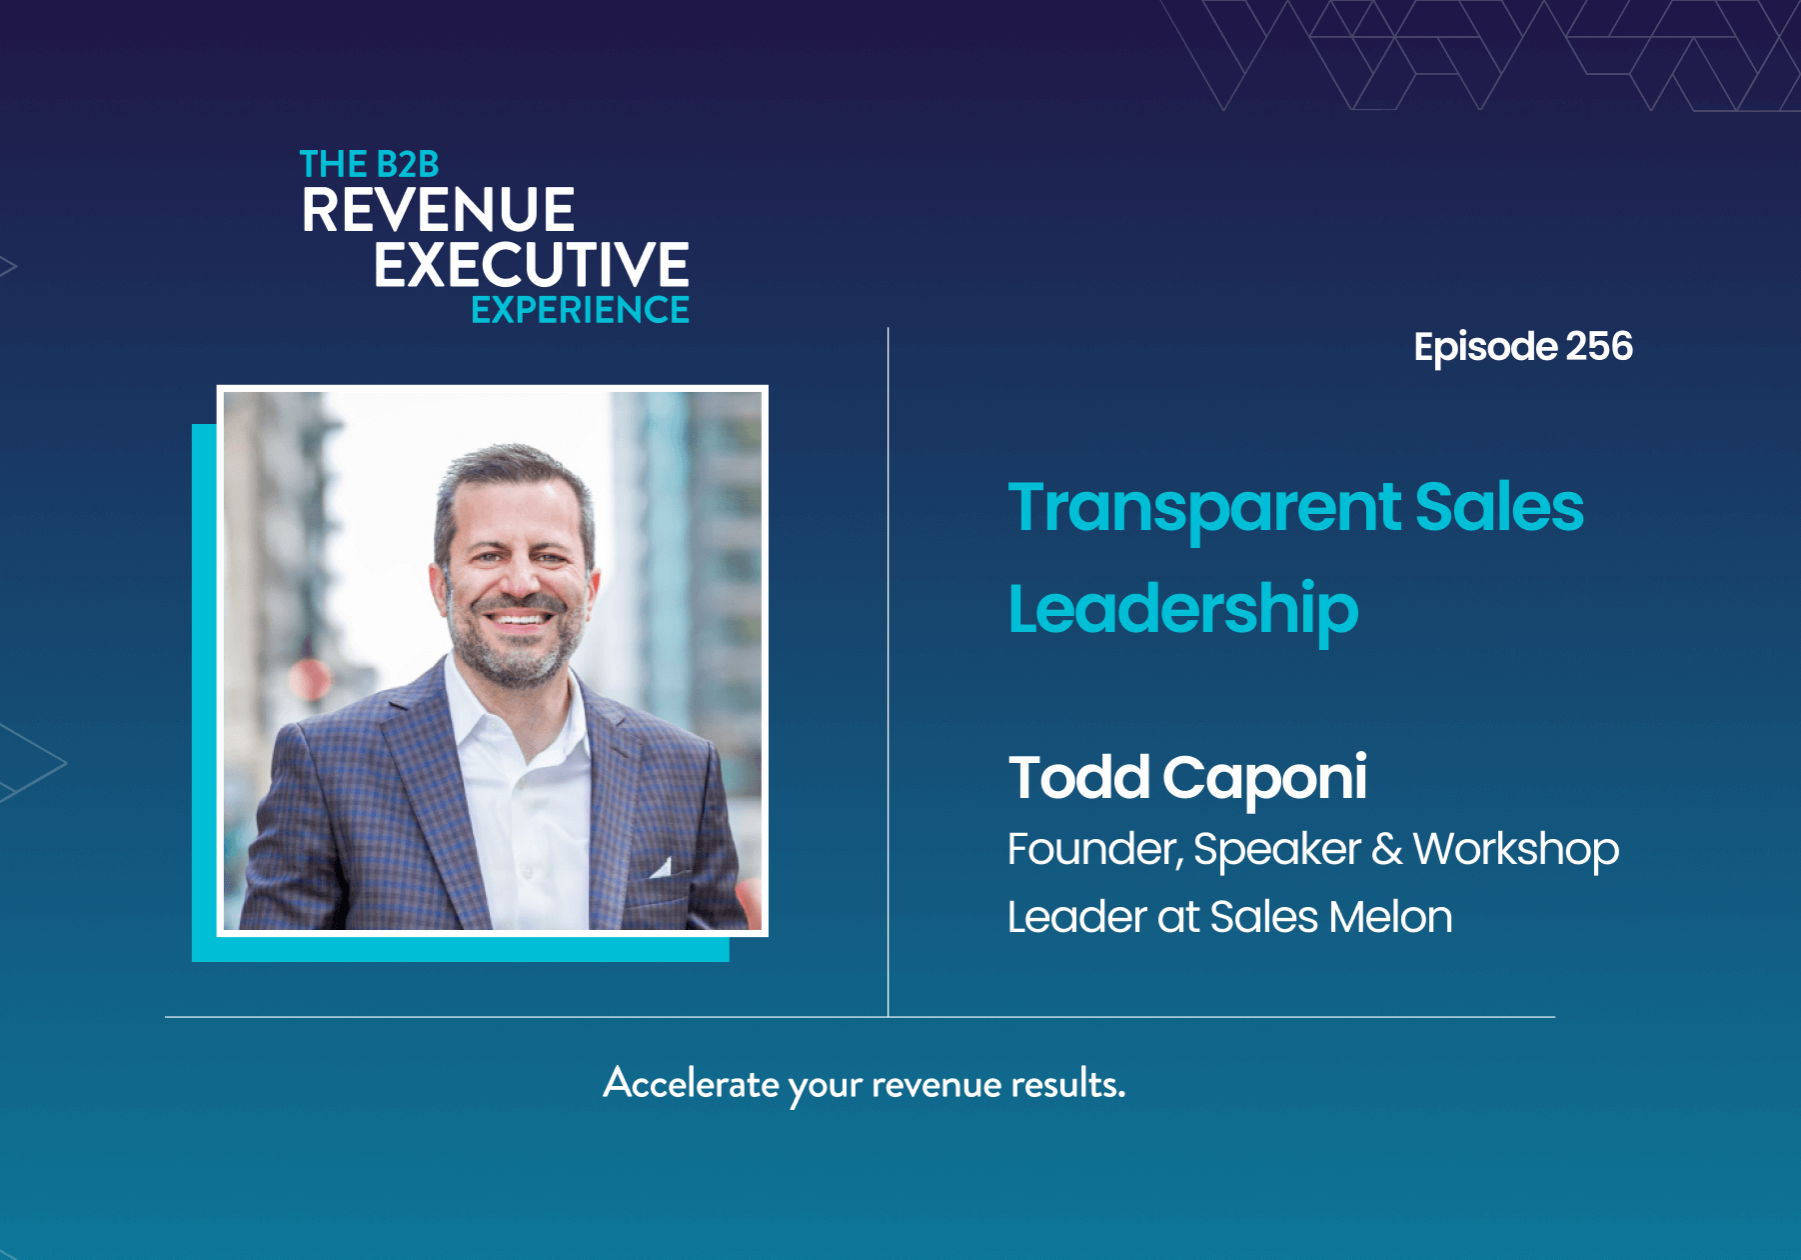 Headshot of Todd Caponi who joined us to discuss sales leadership